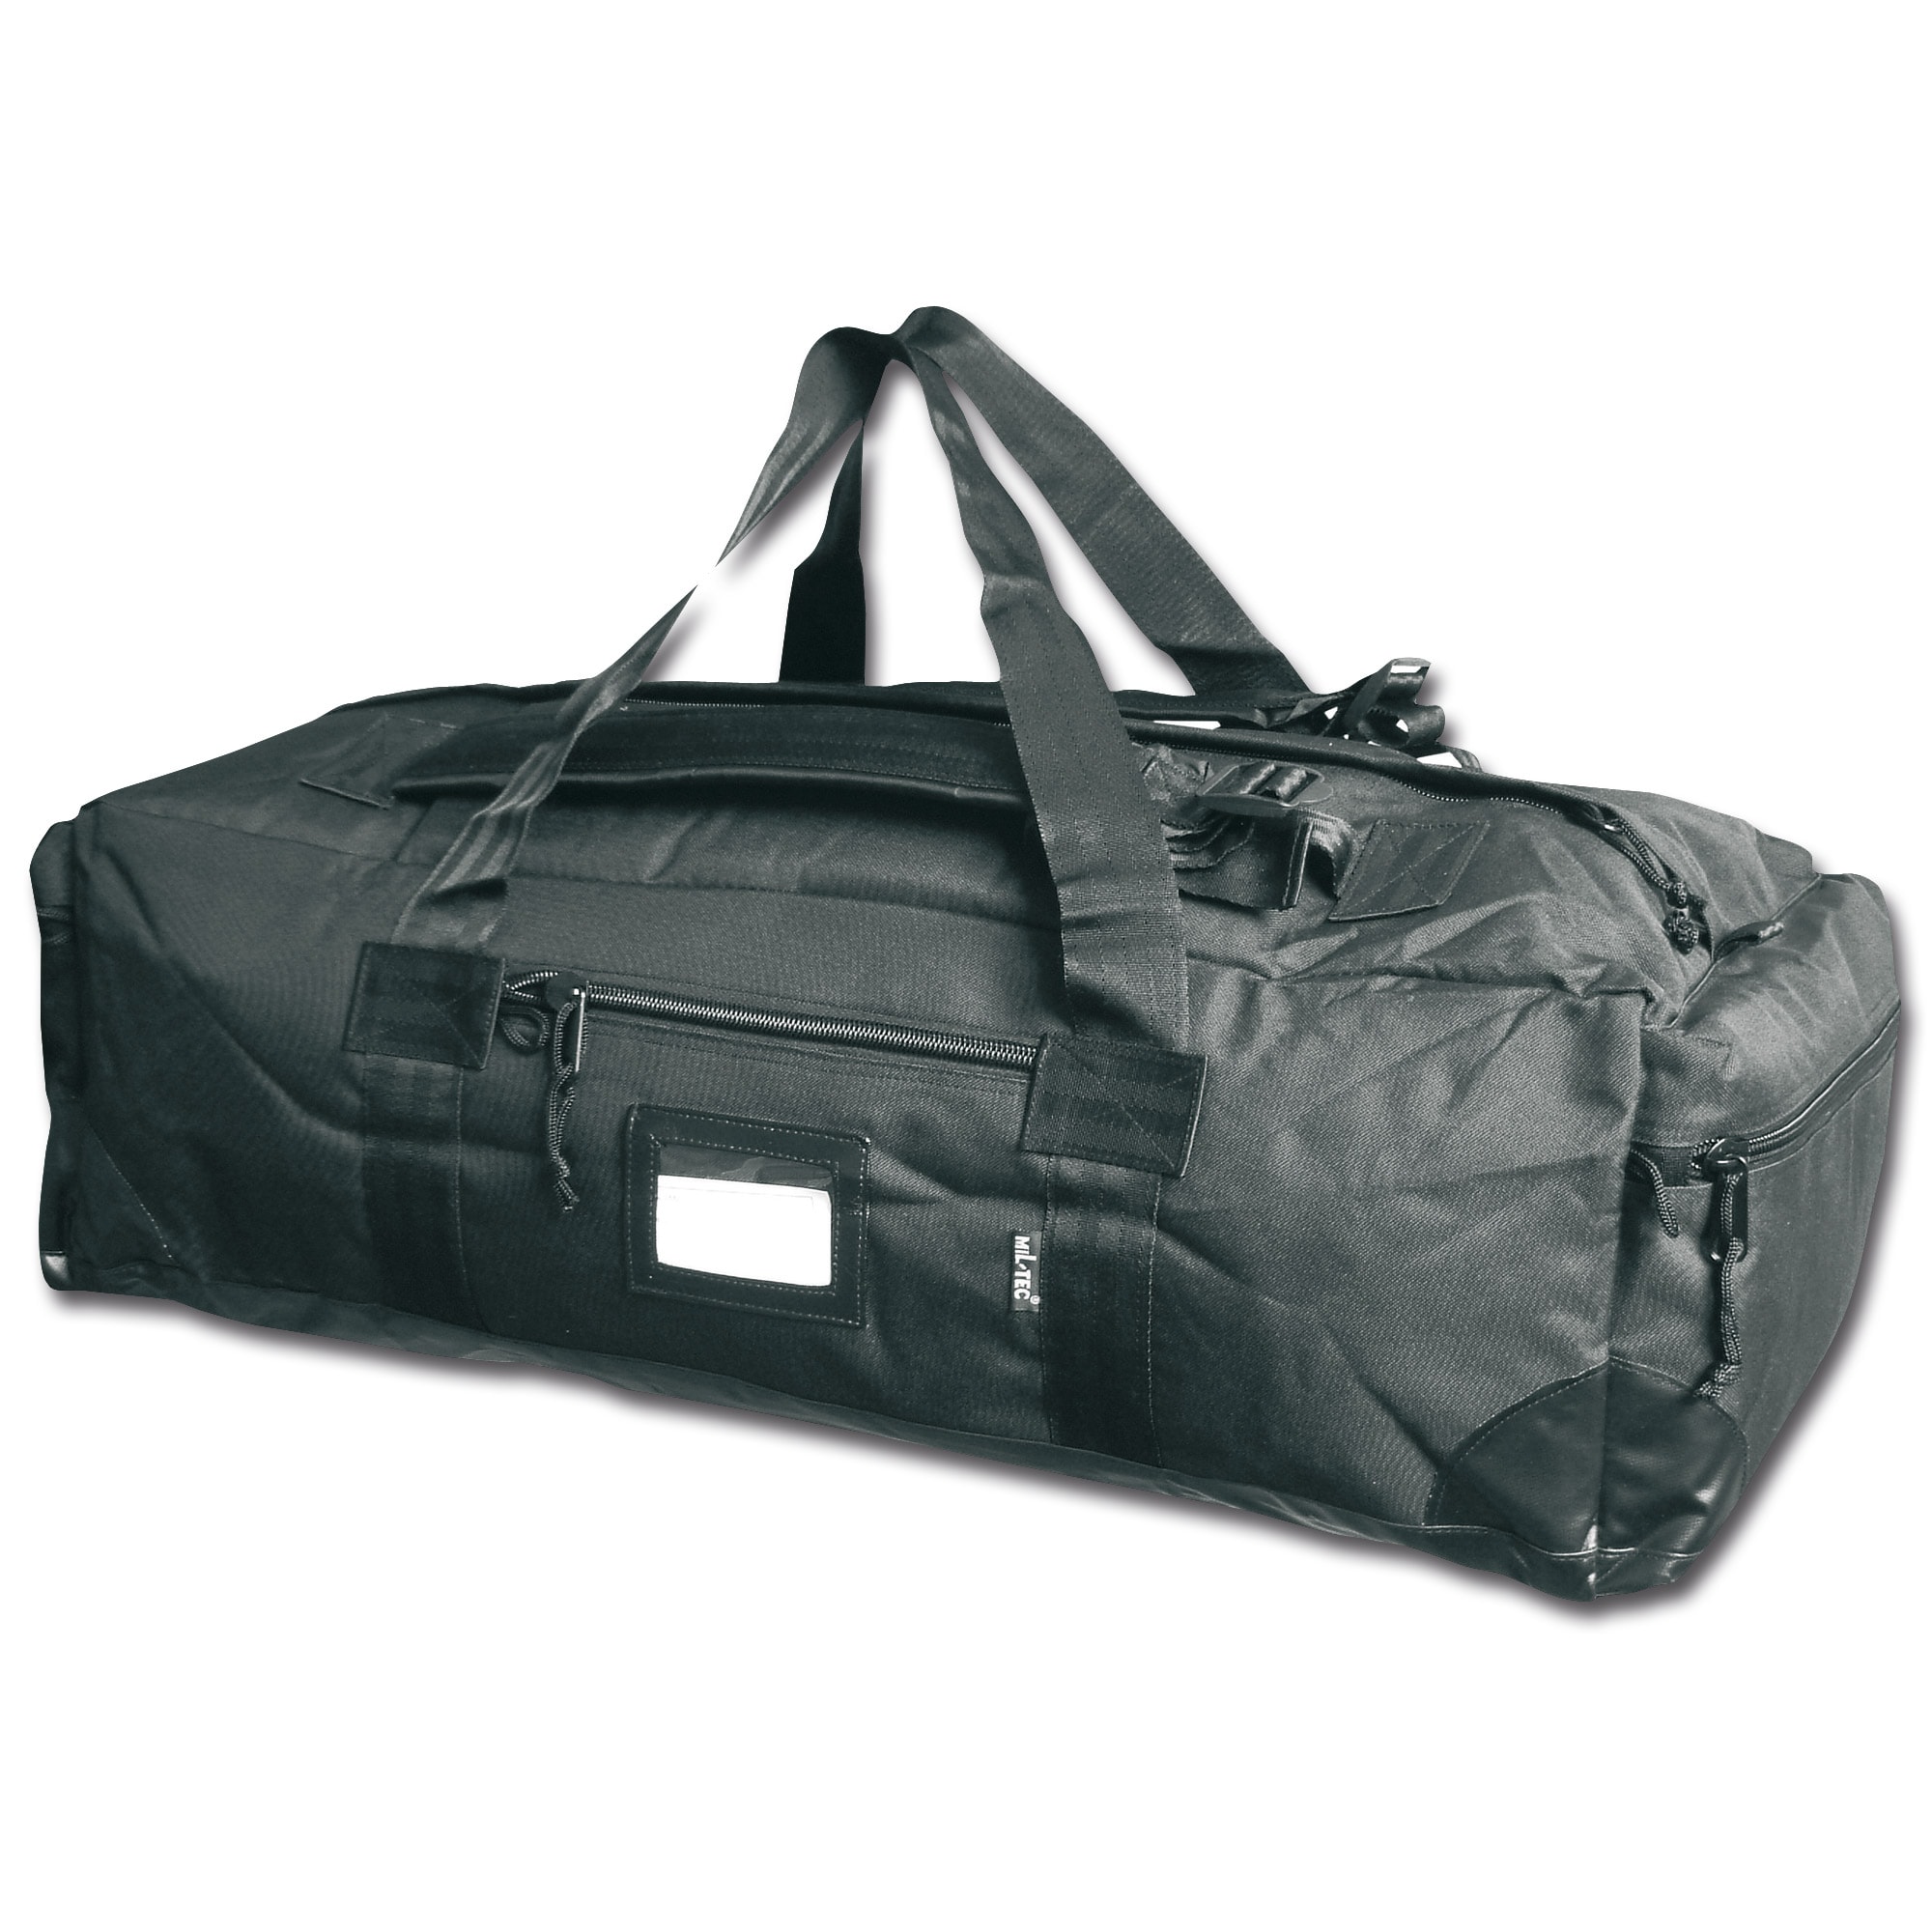 Purchase the Tactical Duffel Bag black by ASMC